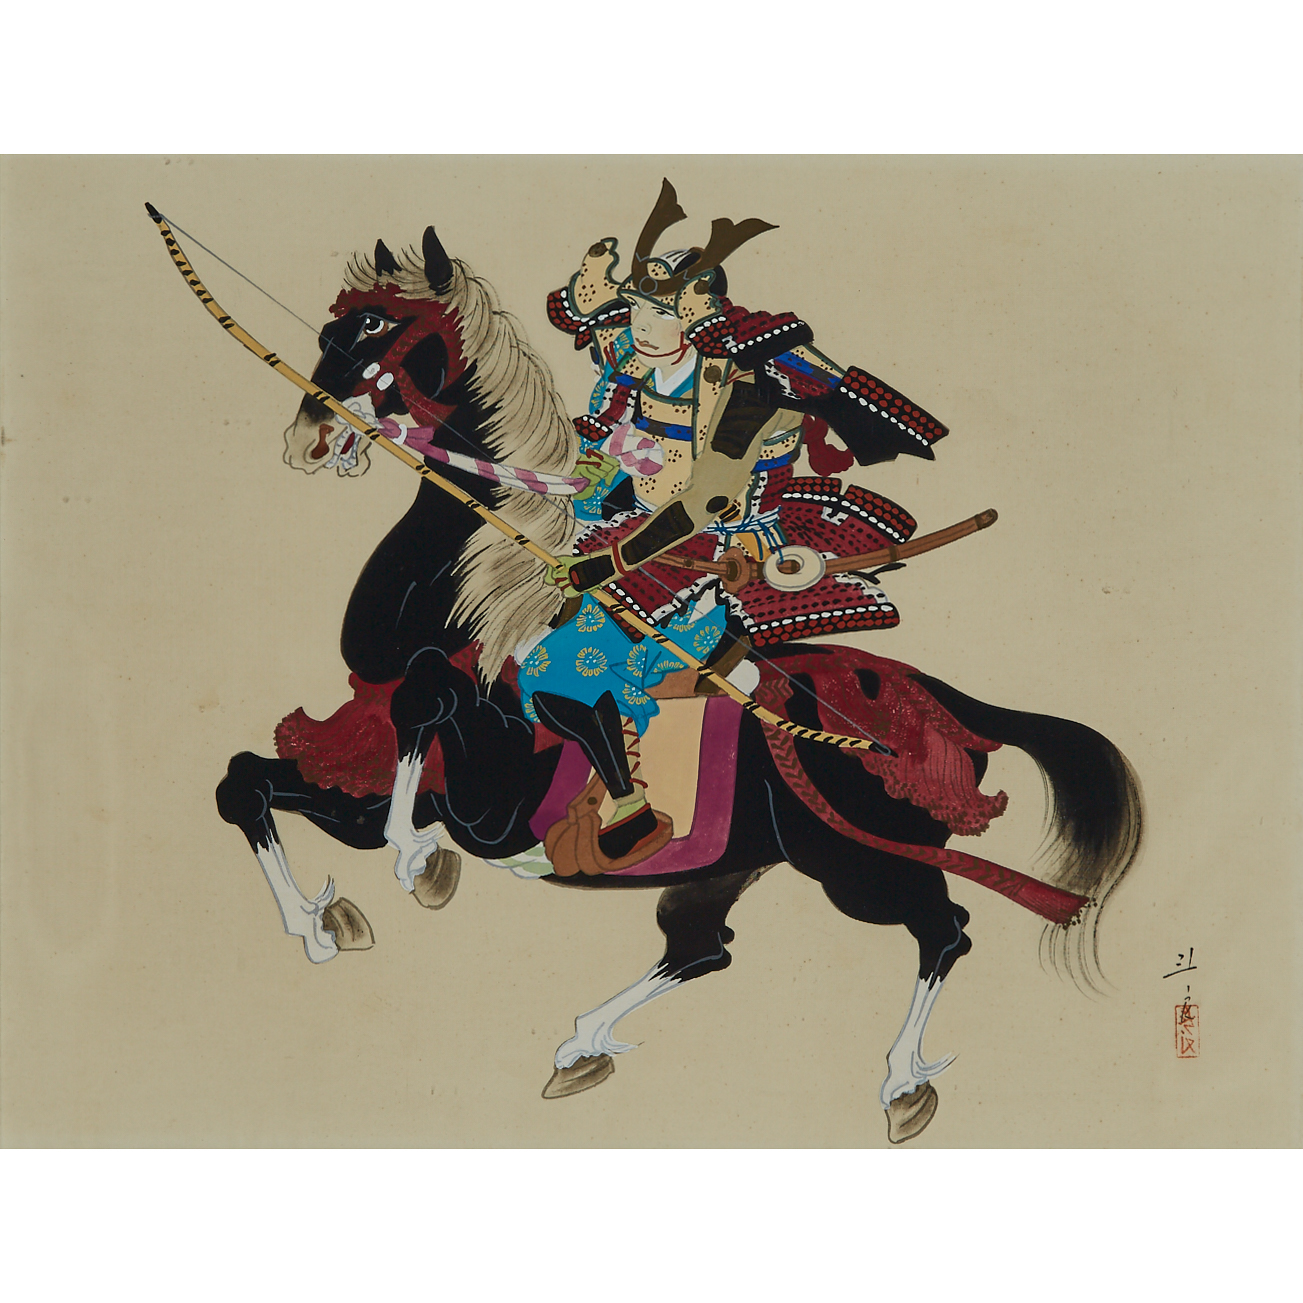 A Painting of a Mounted Samurai with Bow and Arrow